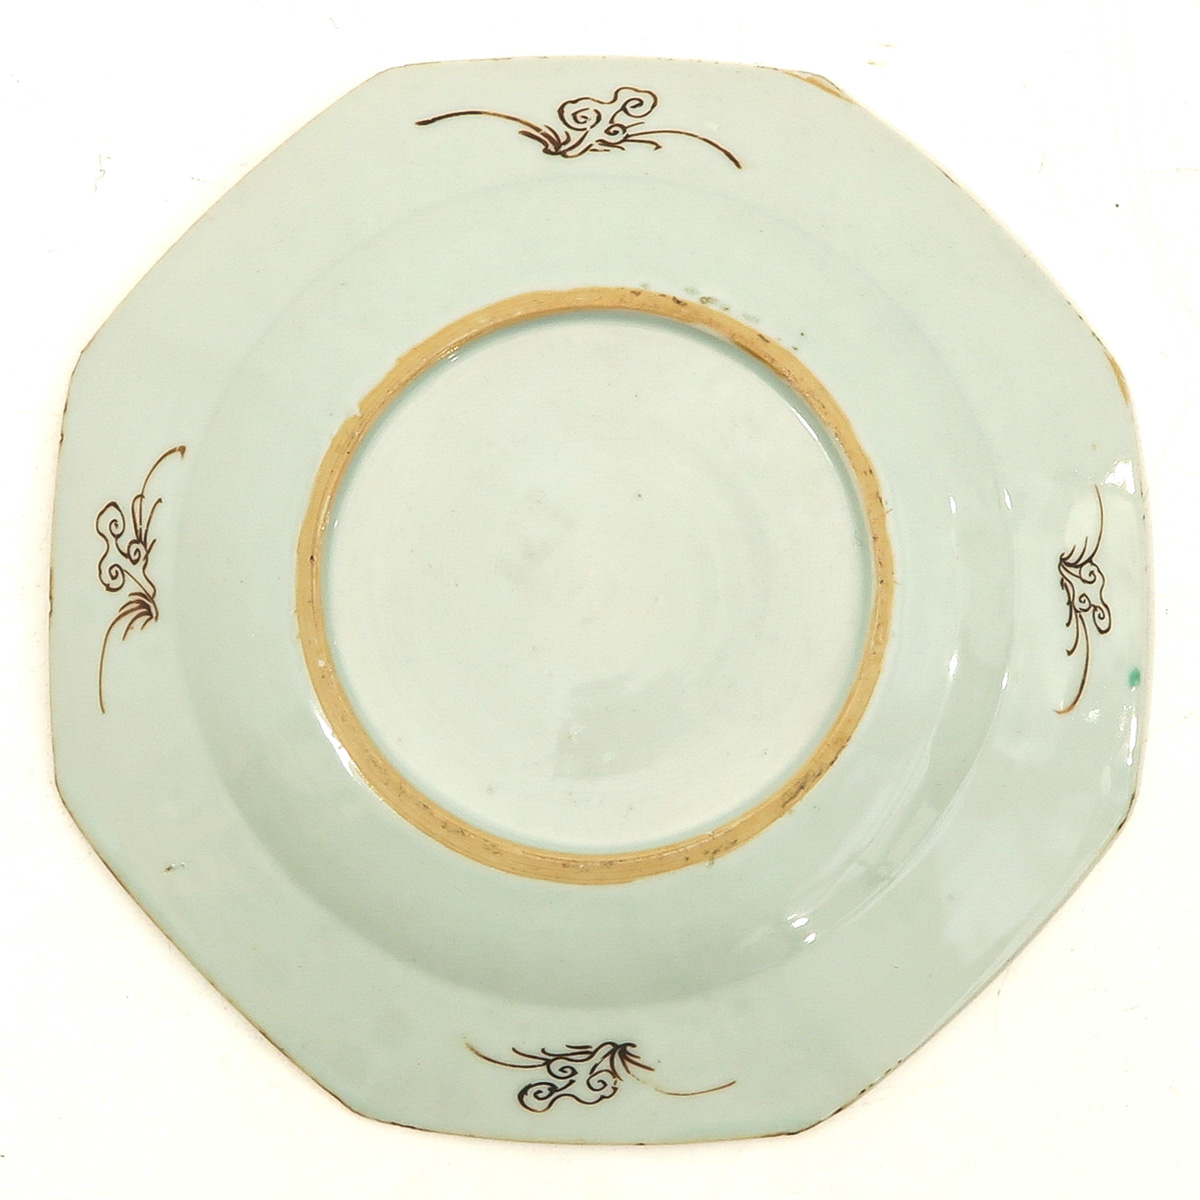 A Series of 3 Famille Rose Plates - Image 4 of 10